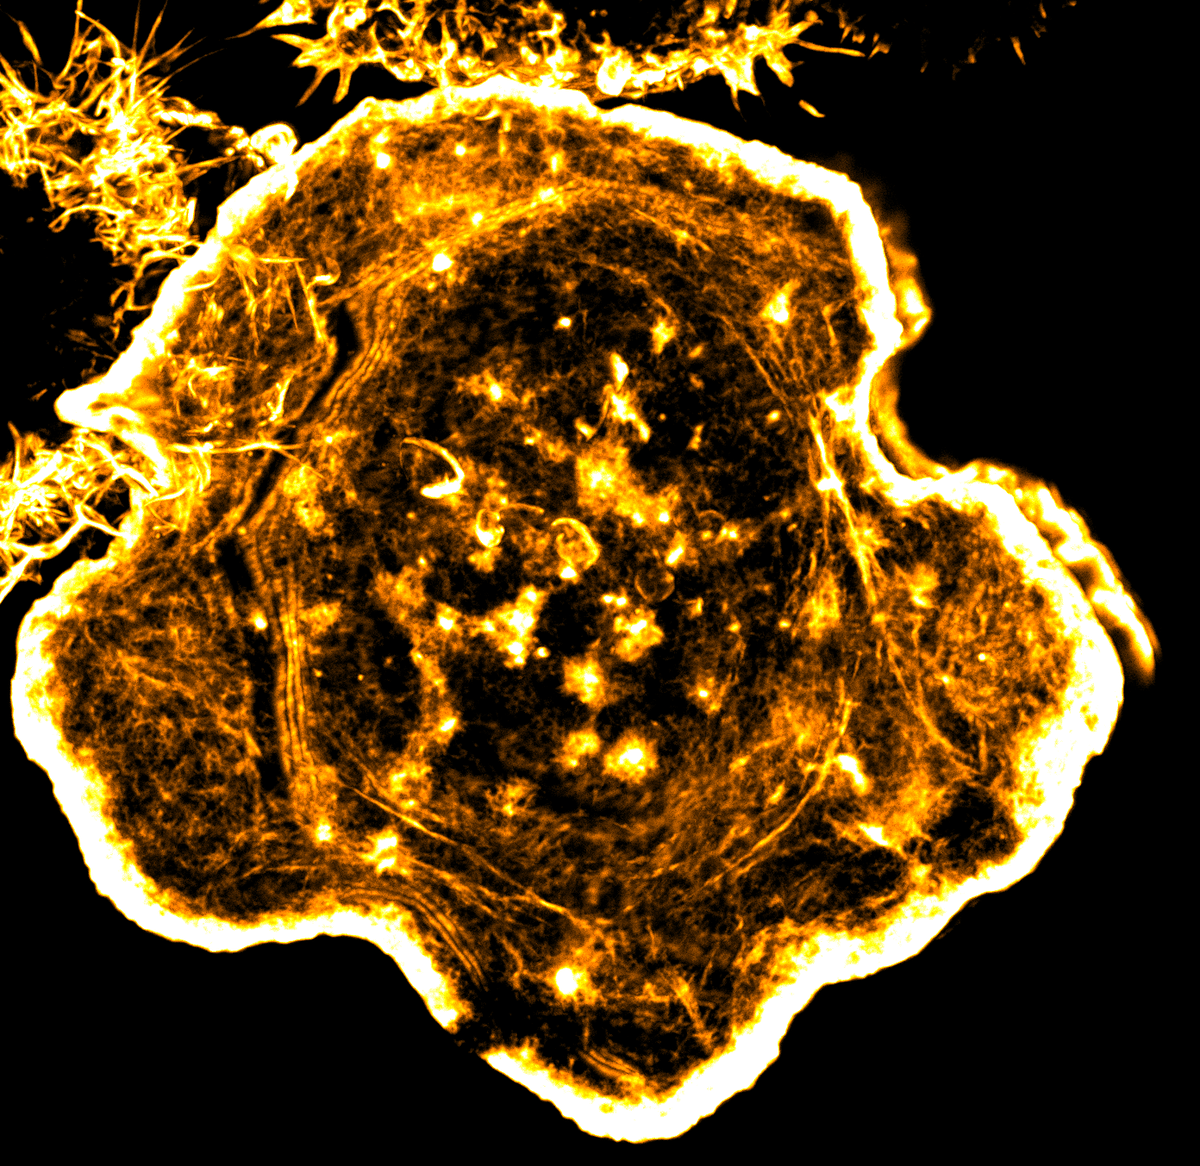 Beautiful actin network at B cell immune synapse (ExM 10x)

#FluorescenceFriday #Bcell #Actin